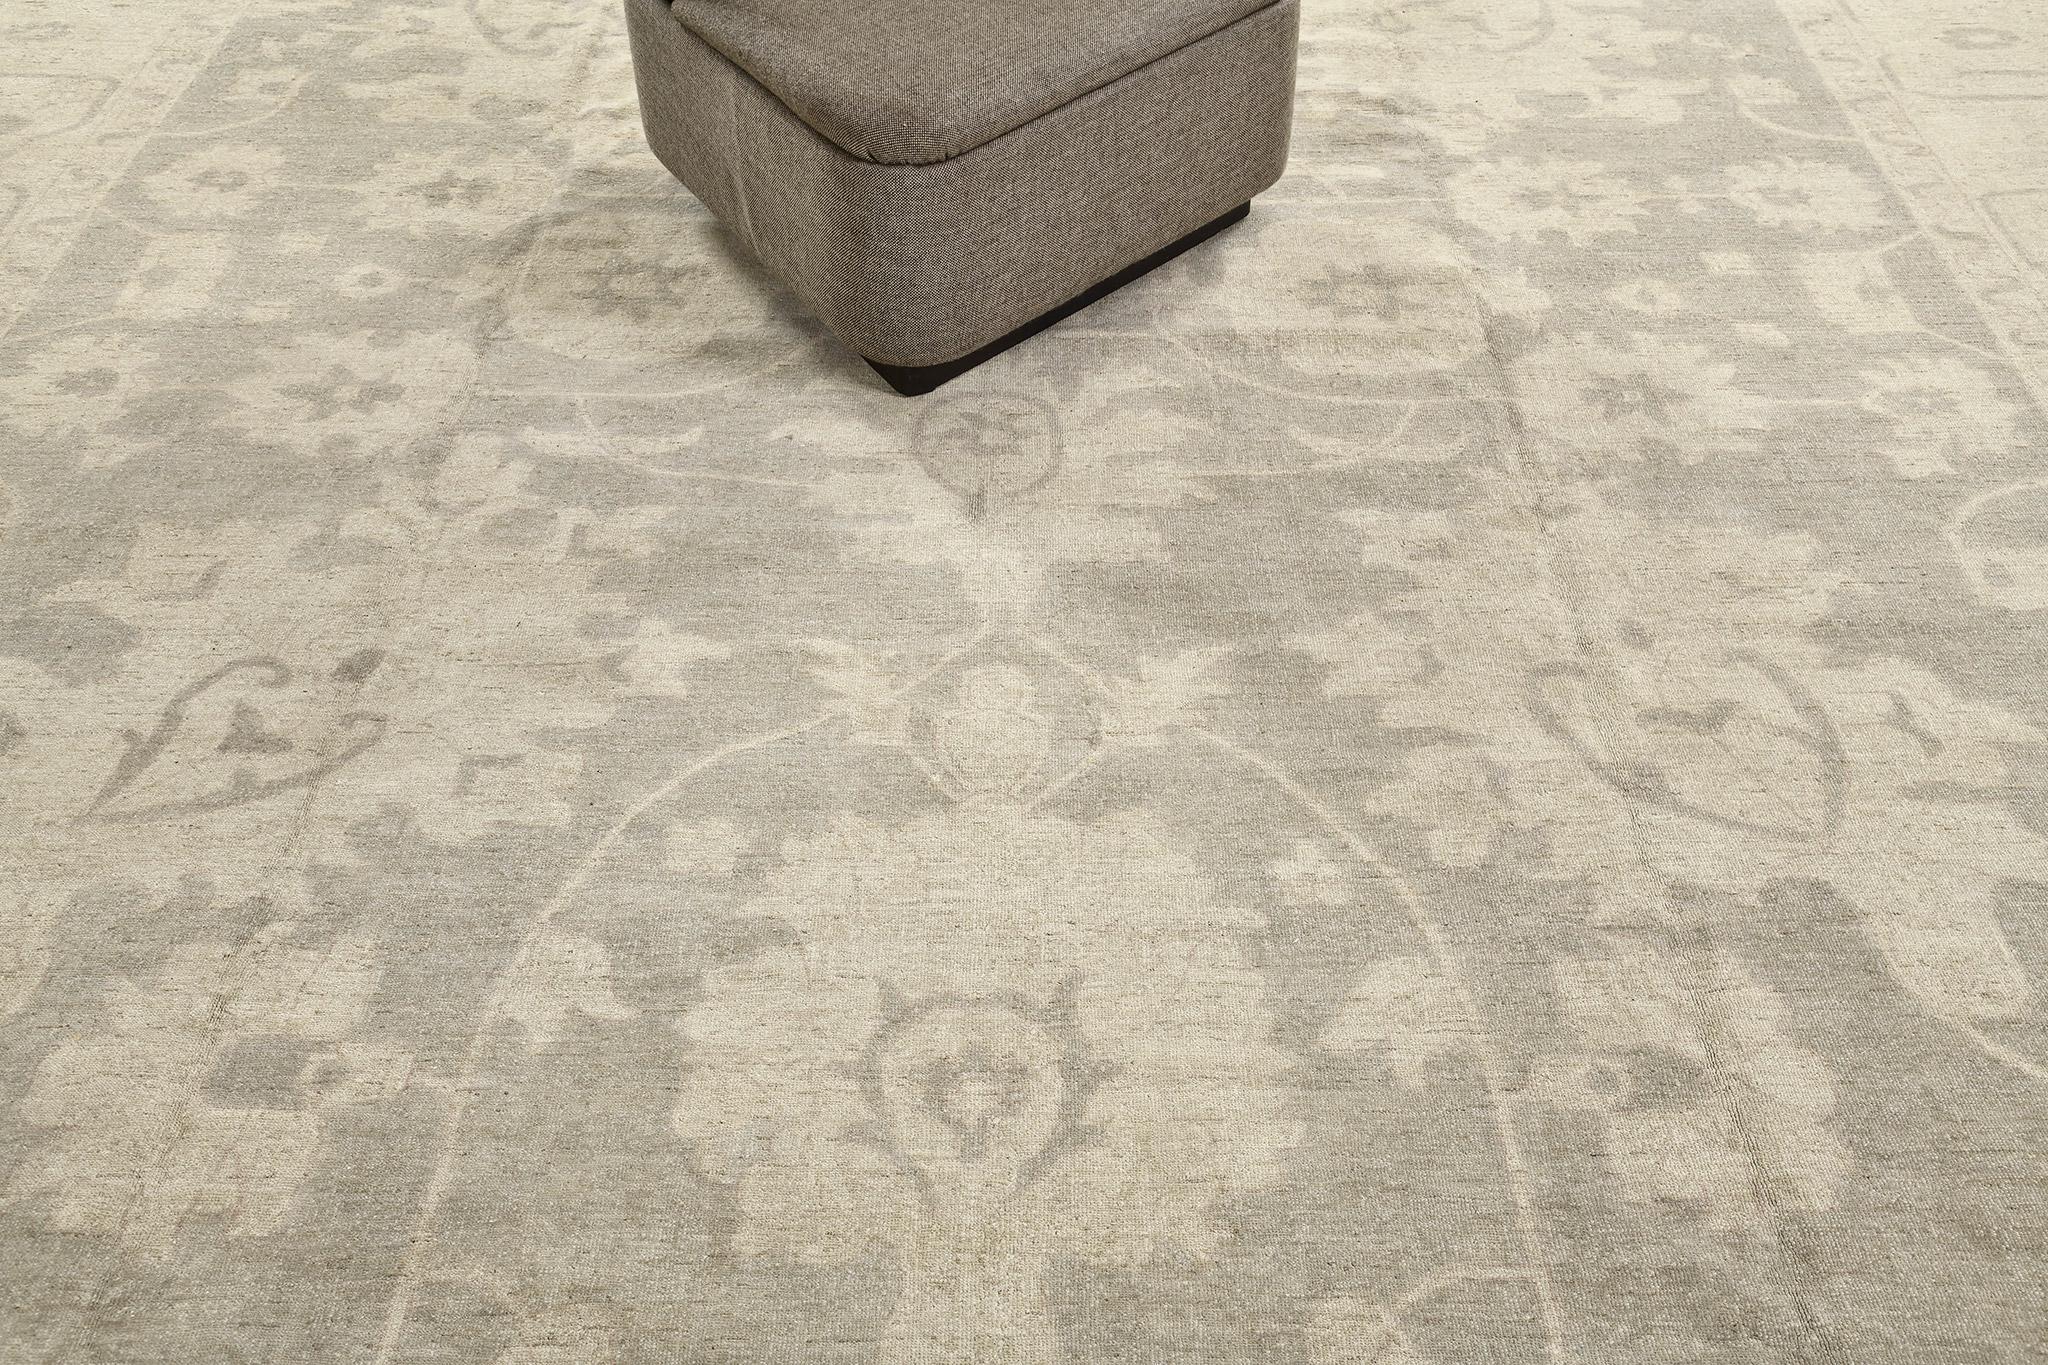 An exceptional Sultanabad revival rug that features the soothing muted tones of beige and slate gray. The large scale palmettes, stylized florals and intertwined vines are gracefully strewn into the stunning abrashed field of this elegant rug. A